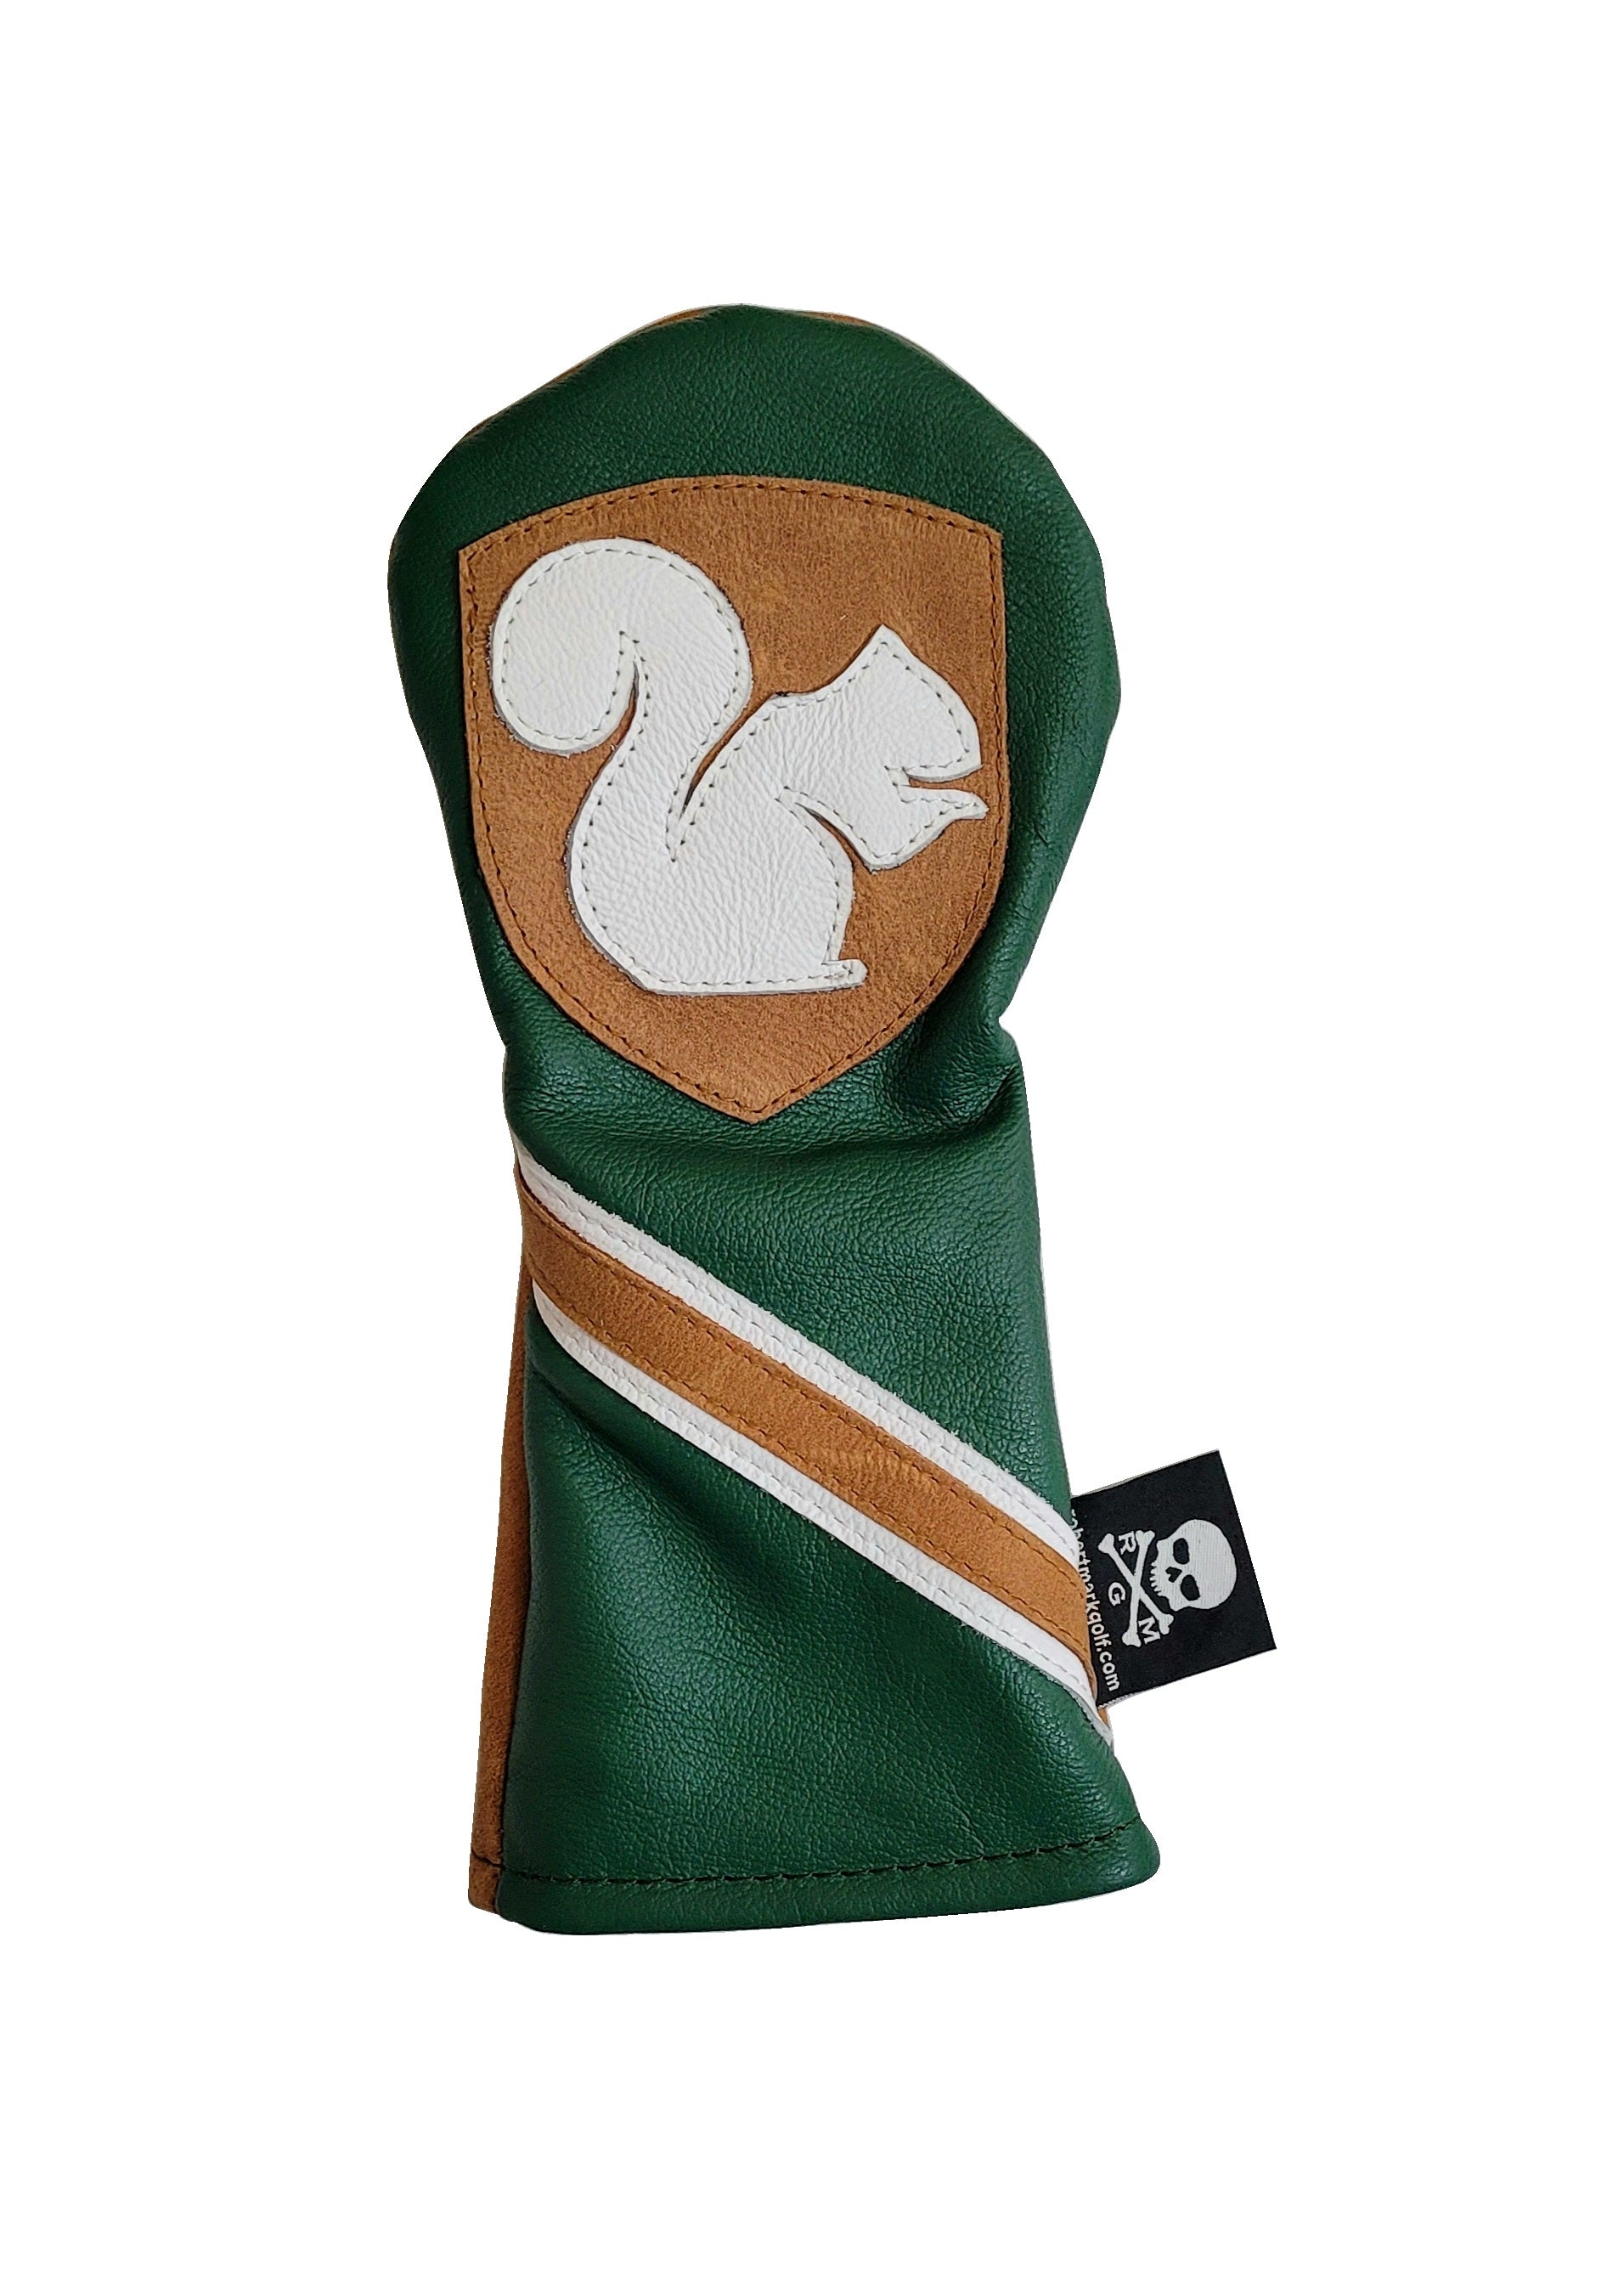 One-Of-A-Kind! The "Get A Nut!" Fairway Wood or Driver Headcover - Robert Mark Golf